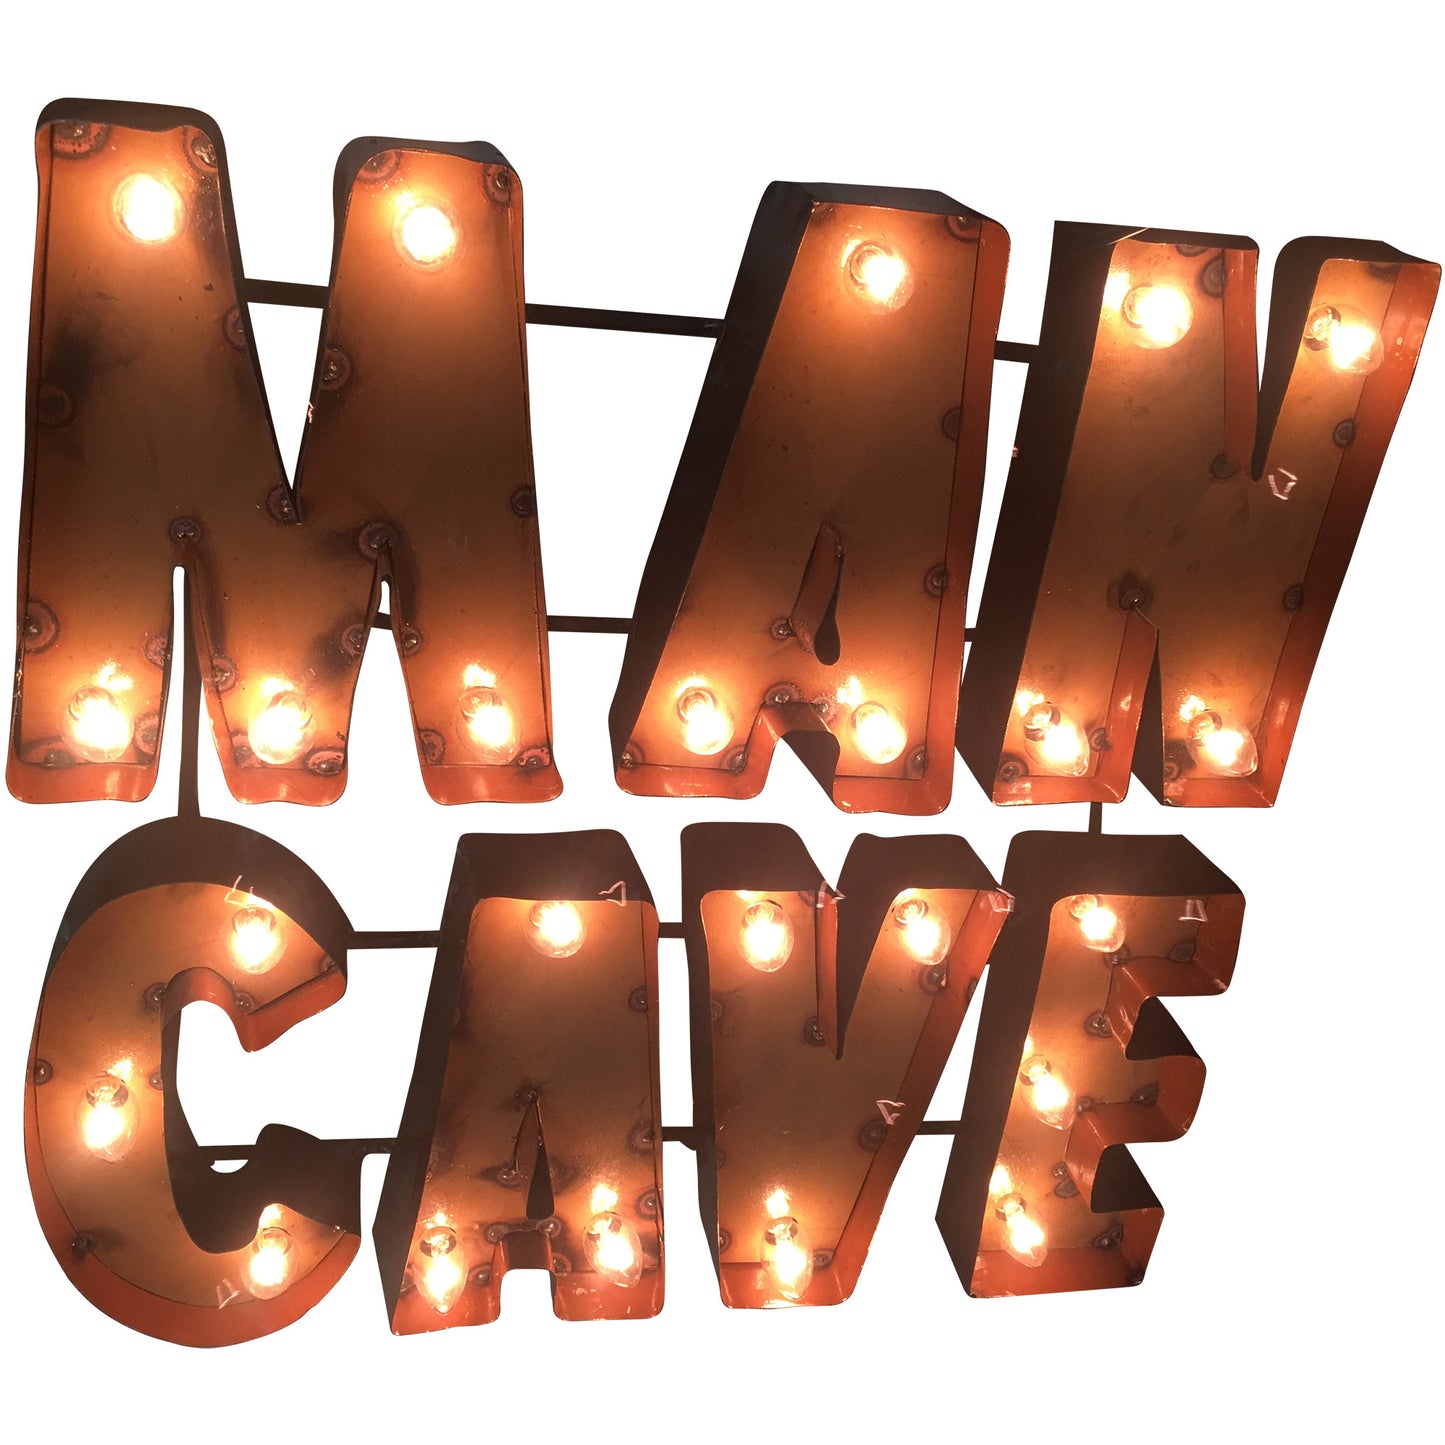 "Man Cave" Lighted Recycled Metal Wall Decor